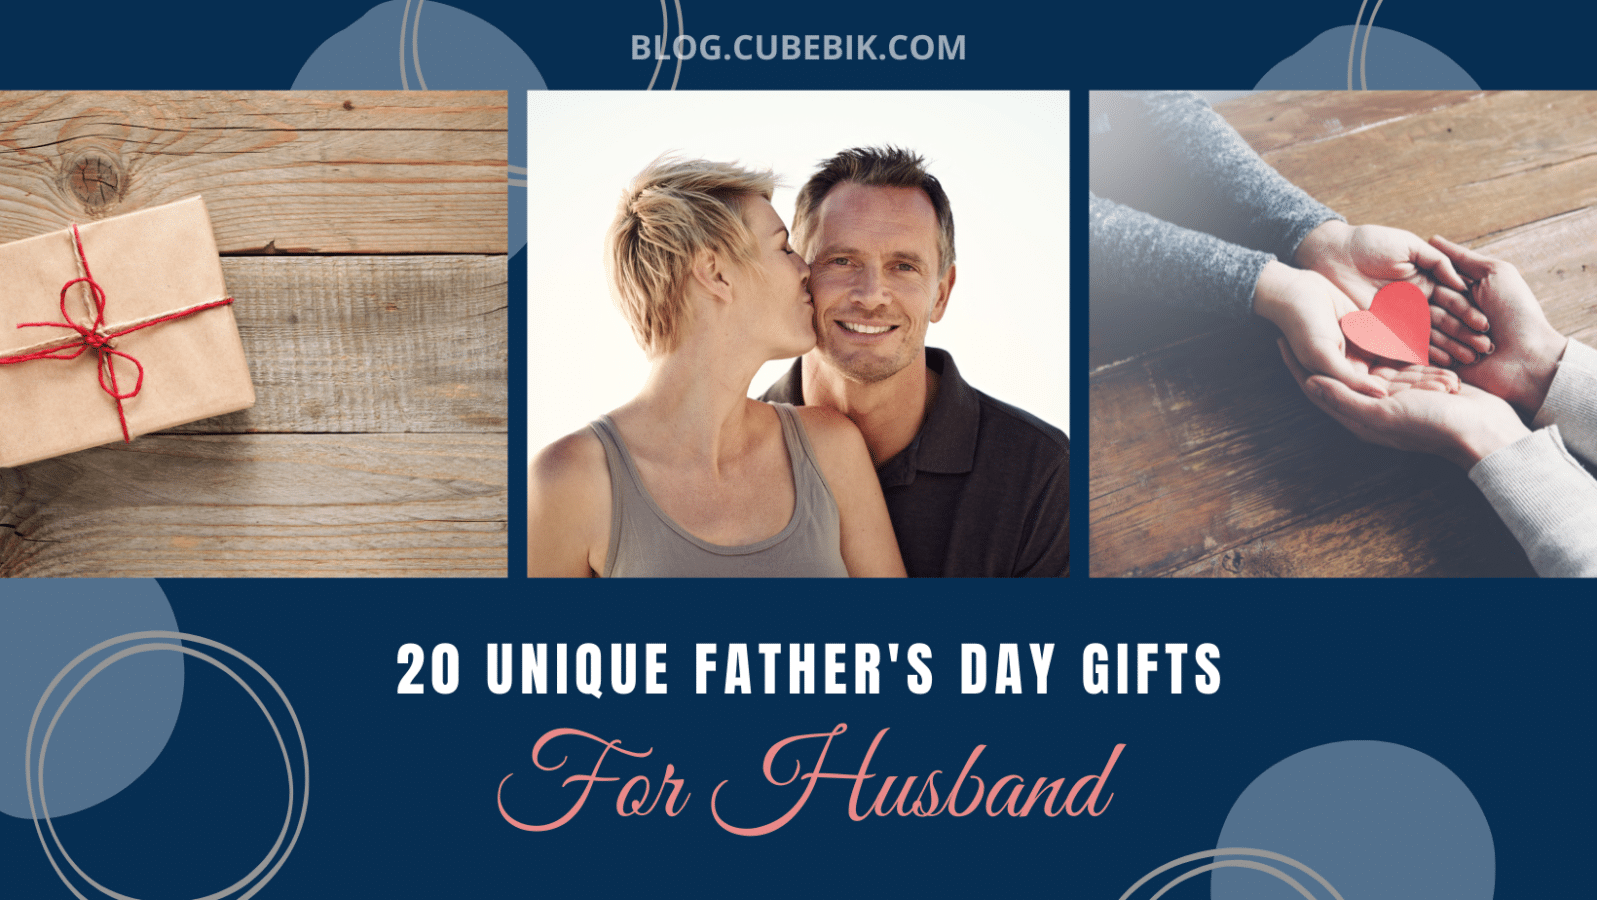 Best 20 Unique Father's Day Gifts For Husband